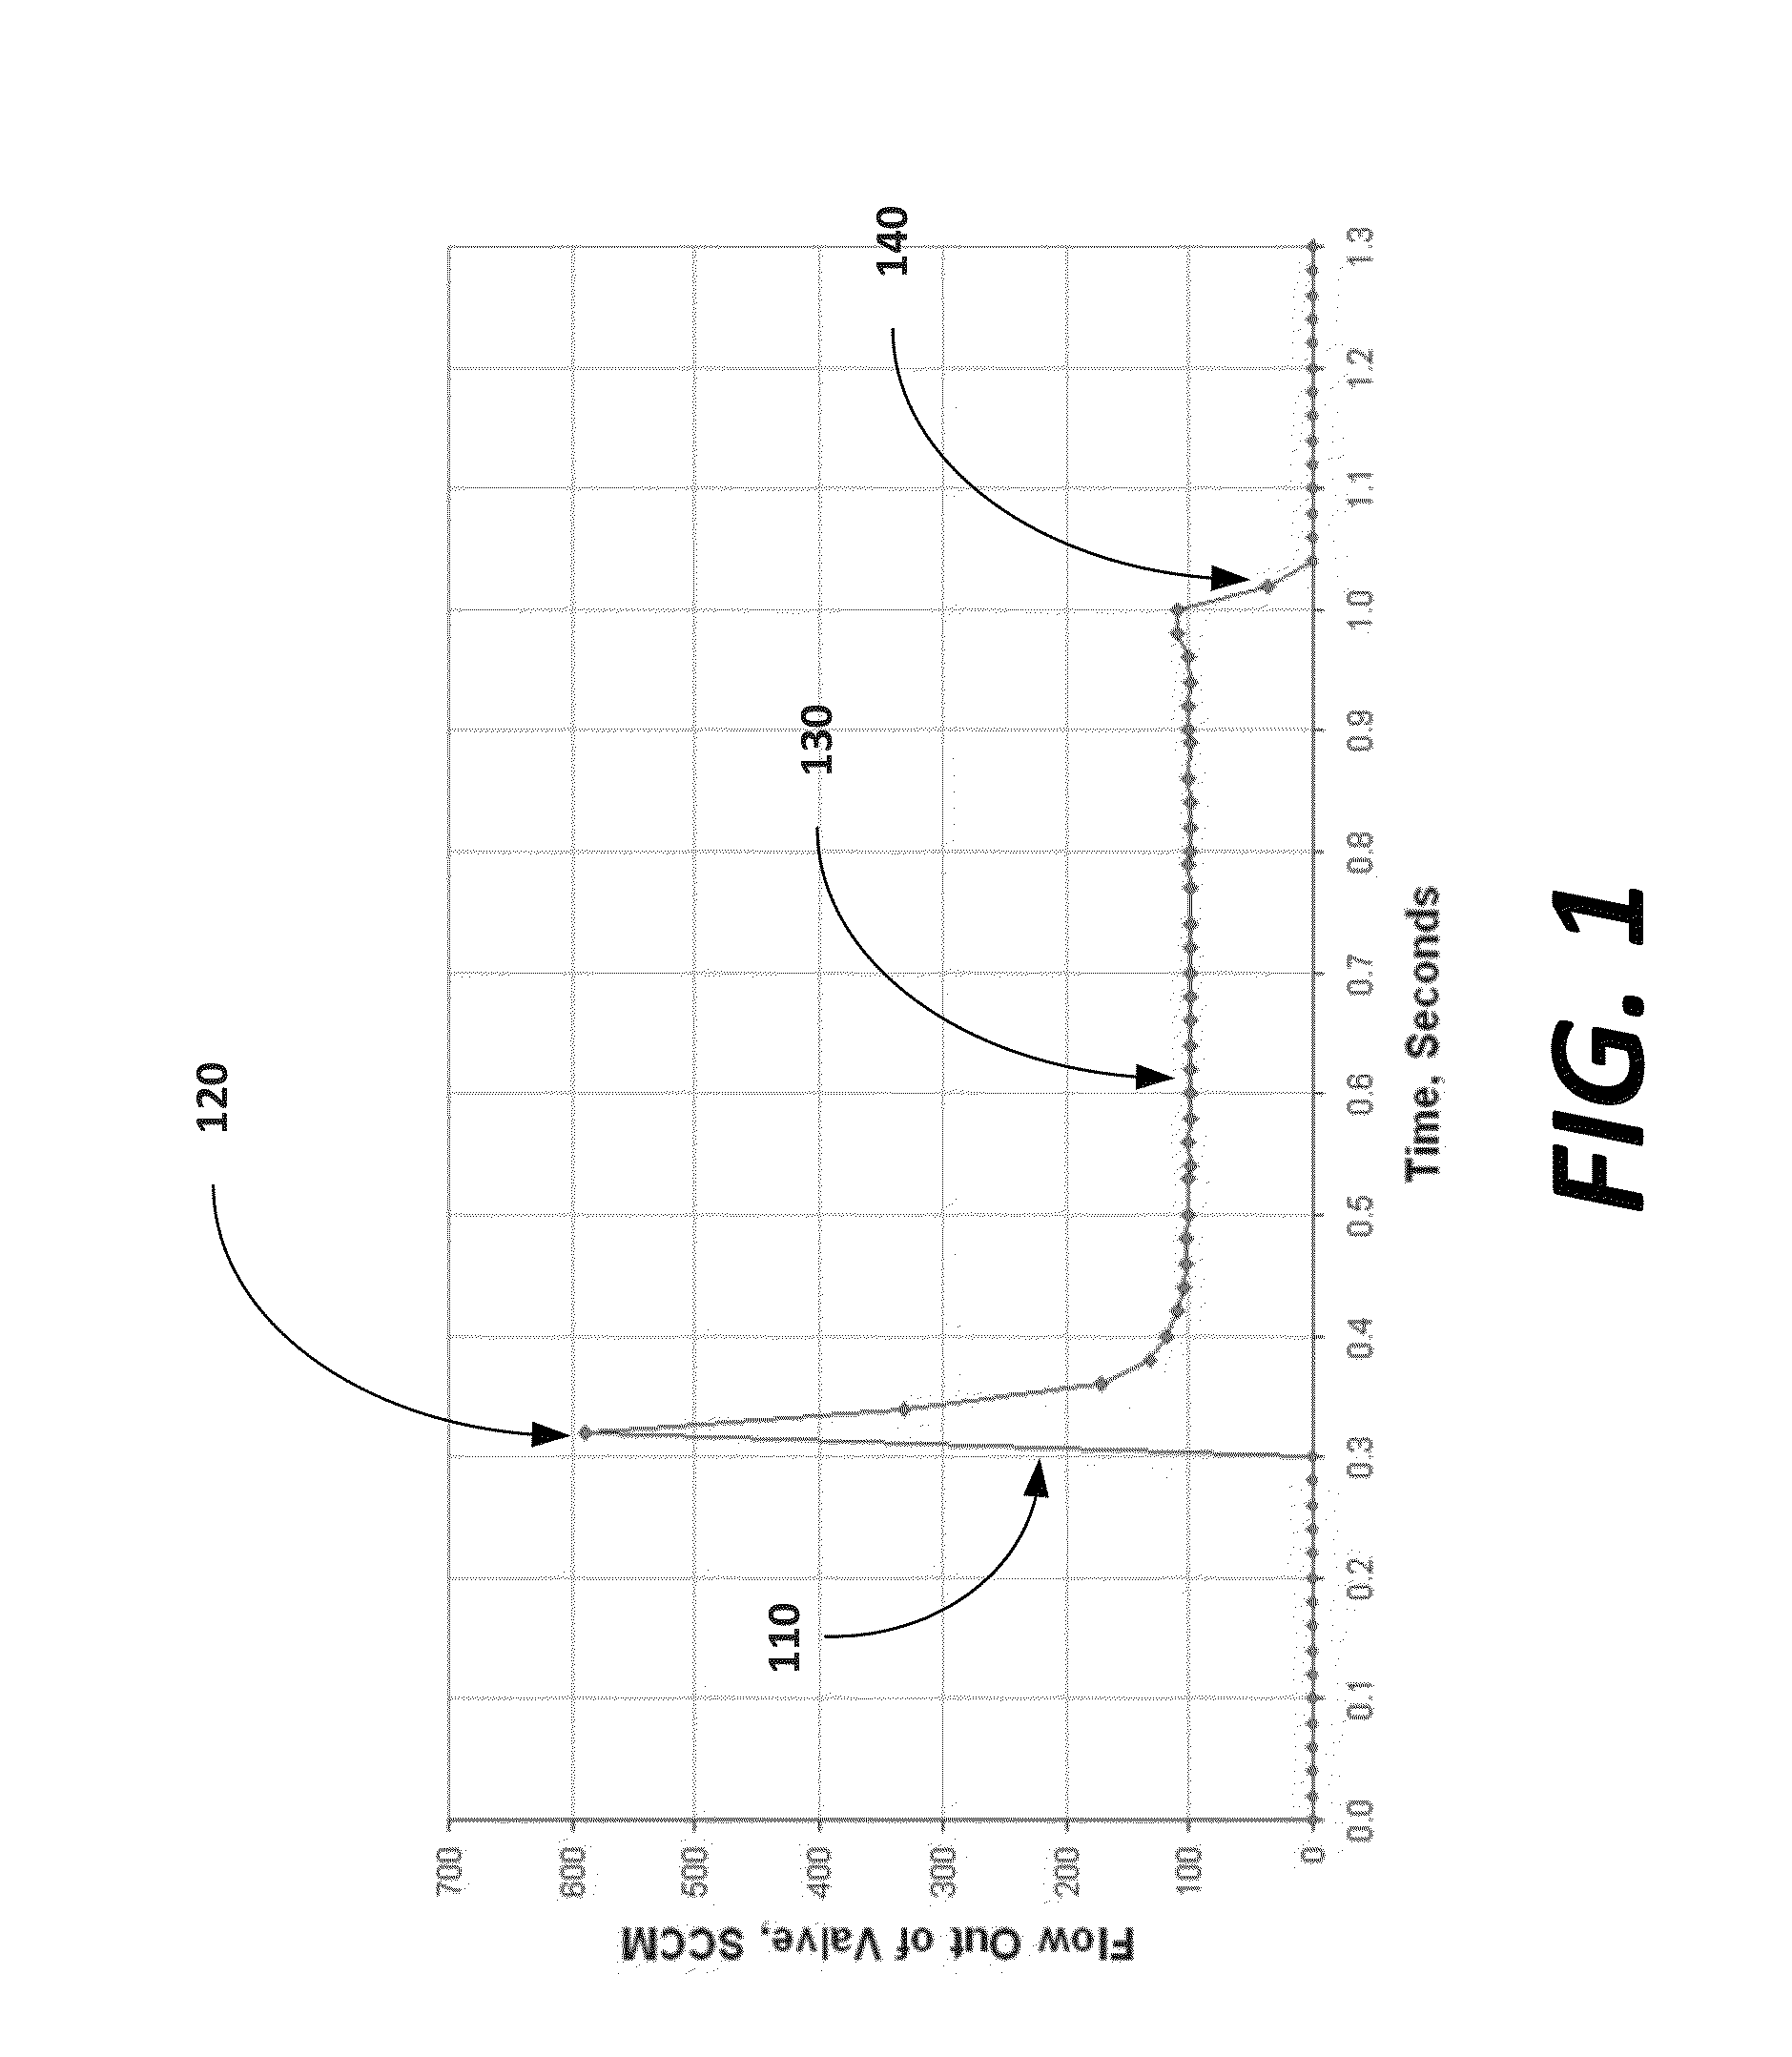 Gas delivery system for outputting fast square waves of process gas during semiconductor processing